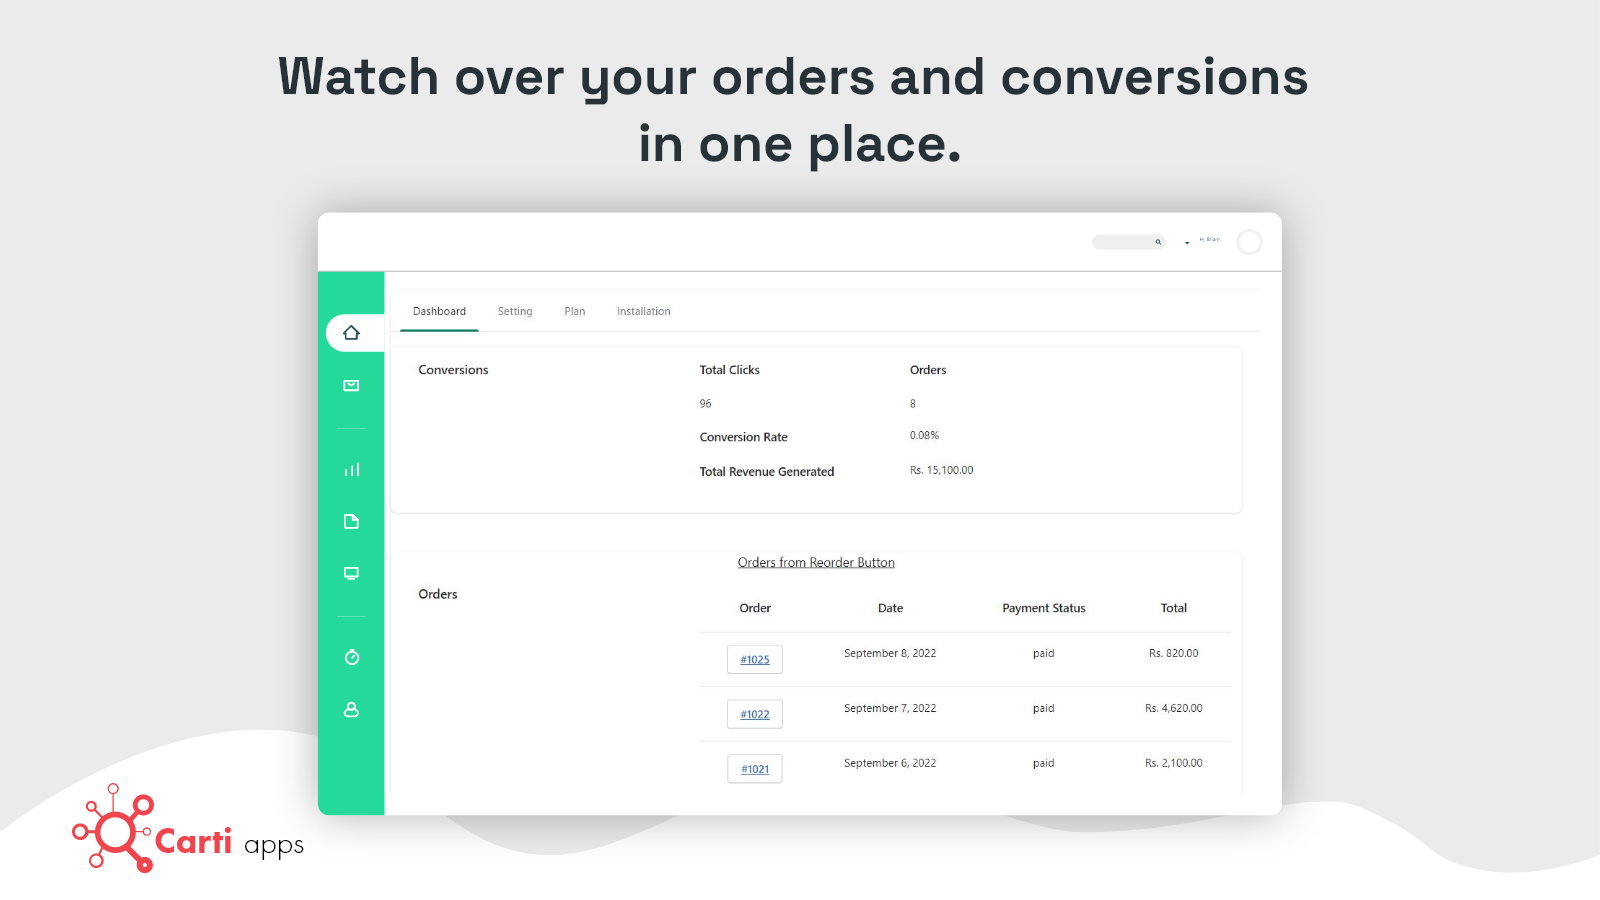 Watch over your orders and conversions.